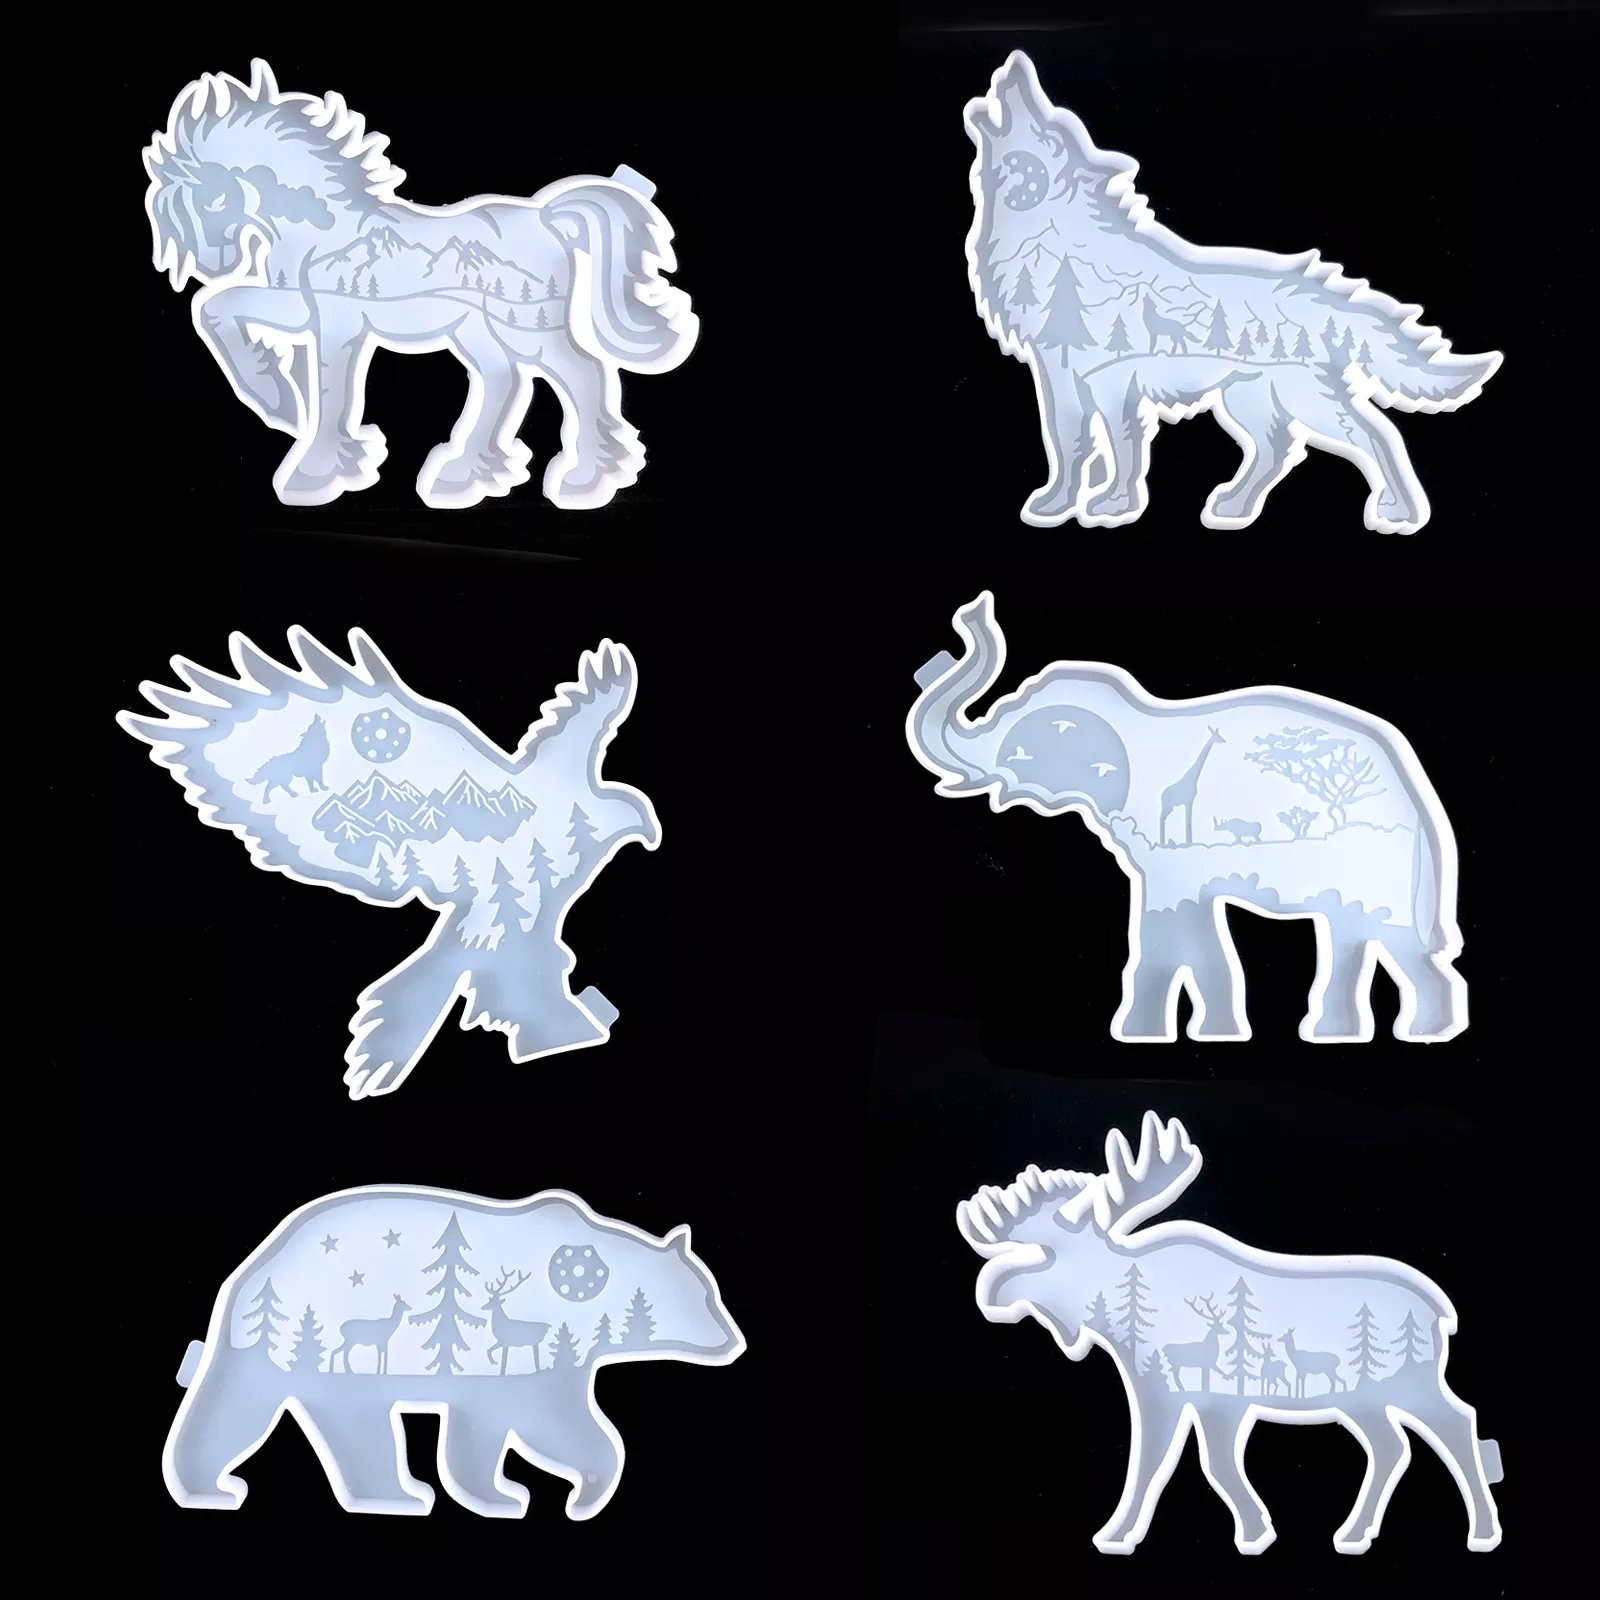 Wuff Meow 3D Animal Resin Molds Tools Resin Casting Molds Epoxy Silicone Molds for Resin Craft DIY Silicone Casting Mold DIY Home Decorations